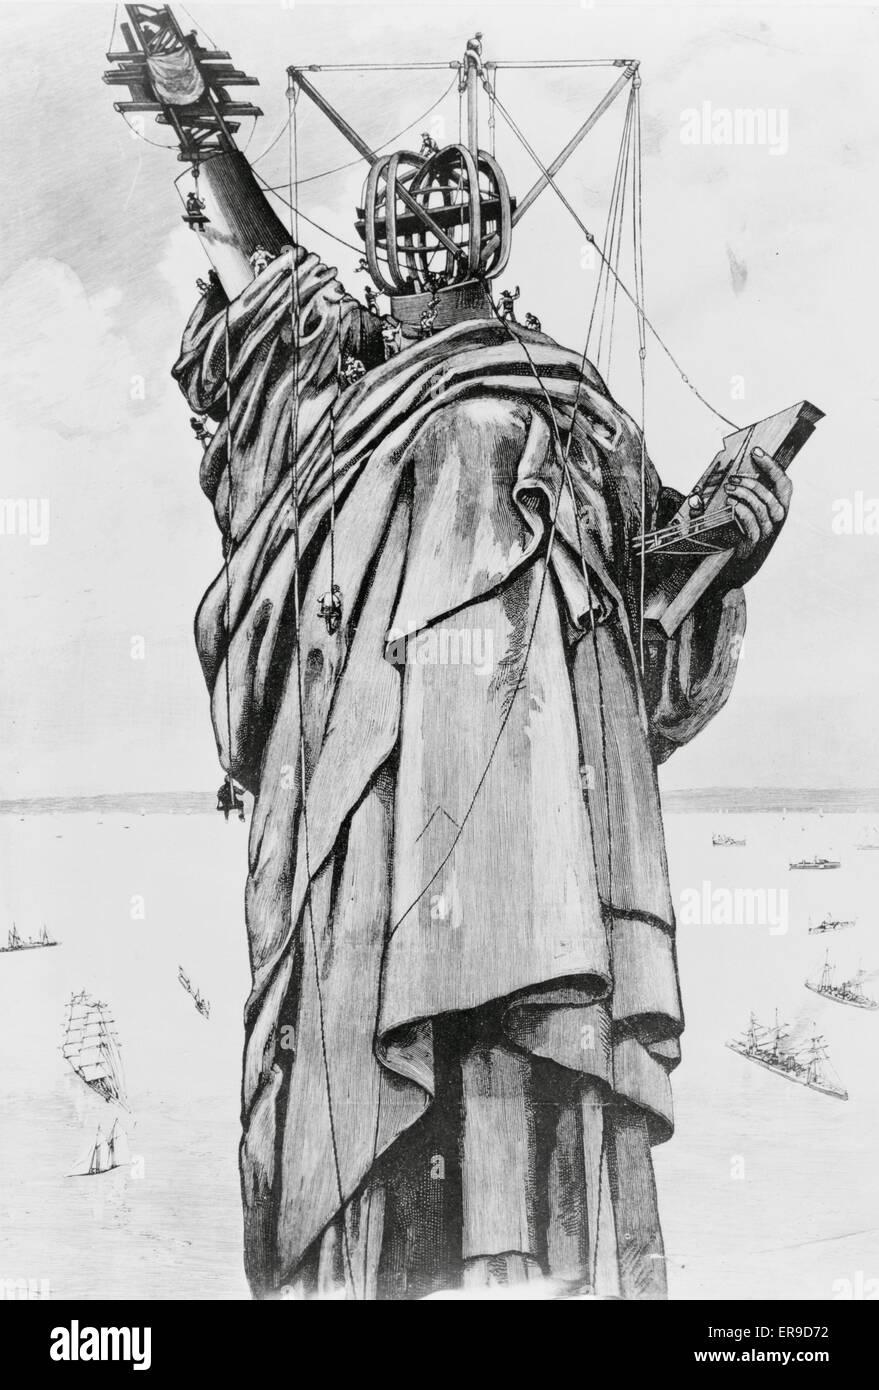 Construction of the Statue of Liberty: Re-constructing the s Stock Photo